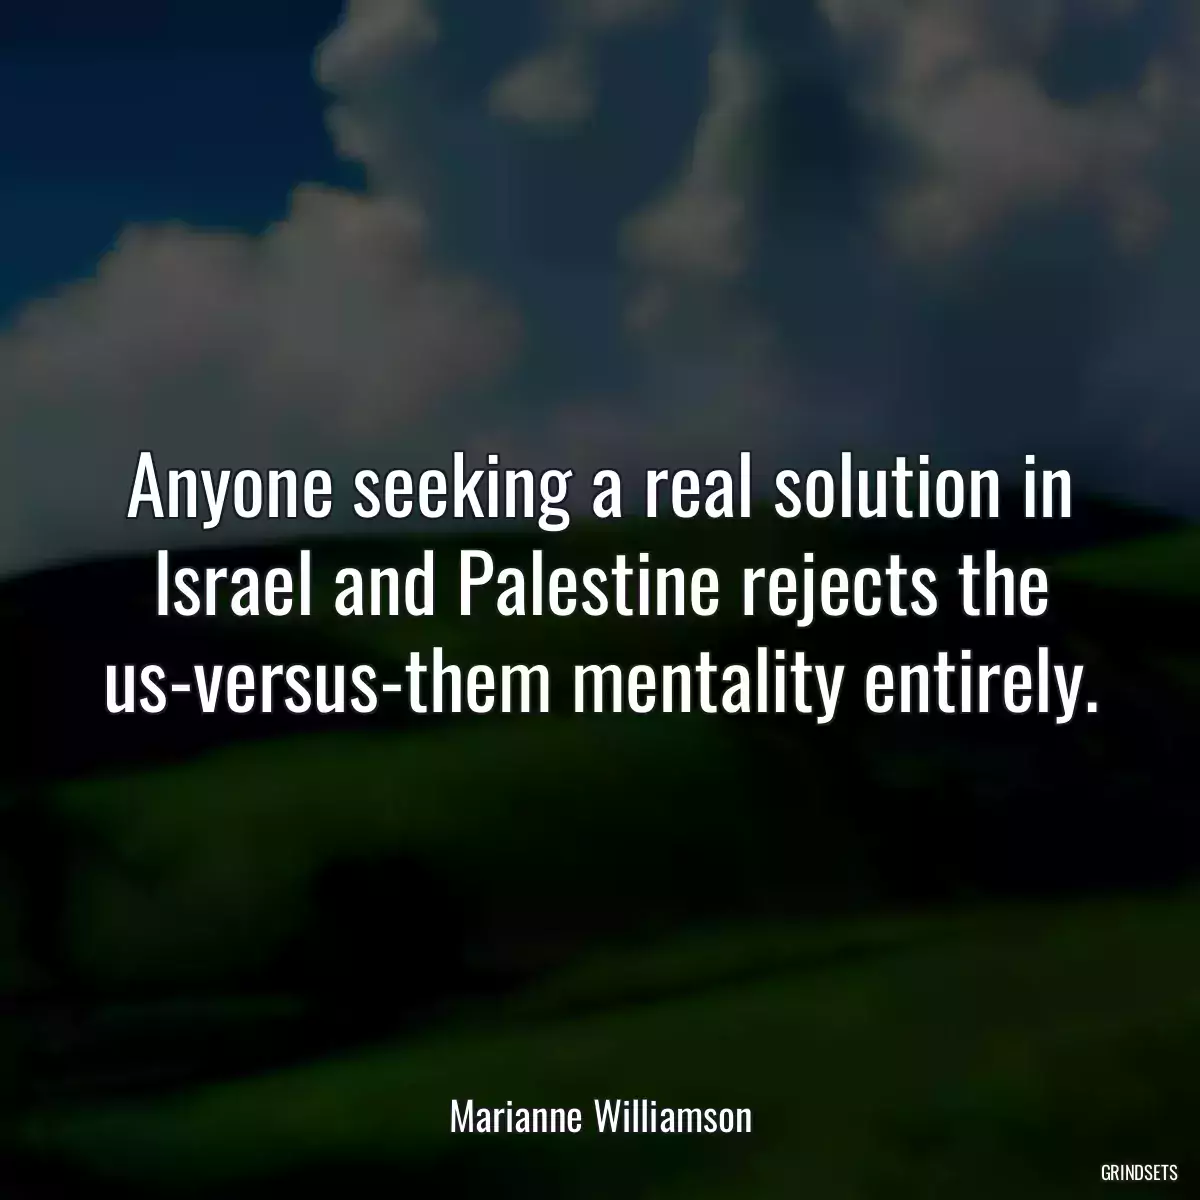 Anyone seeking a real solution in Israel and Palestine rejects the us-versus-them mentality entirely.